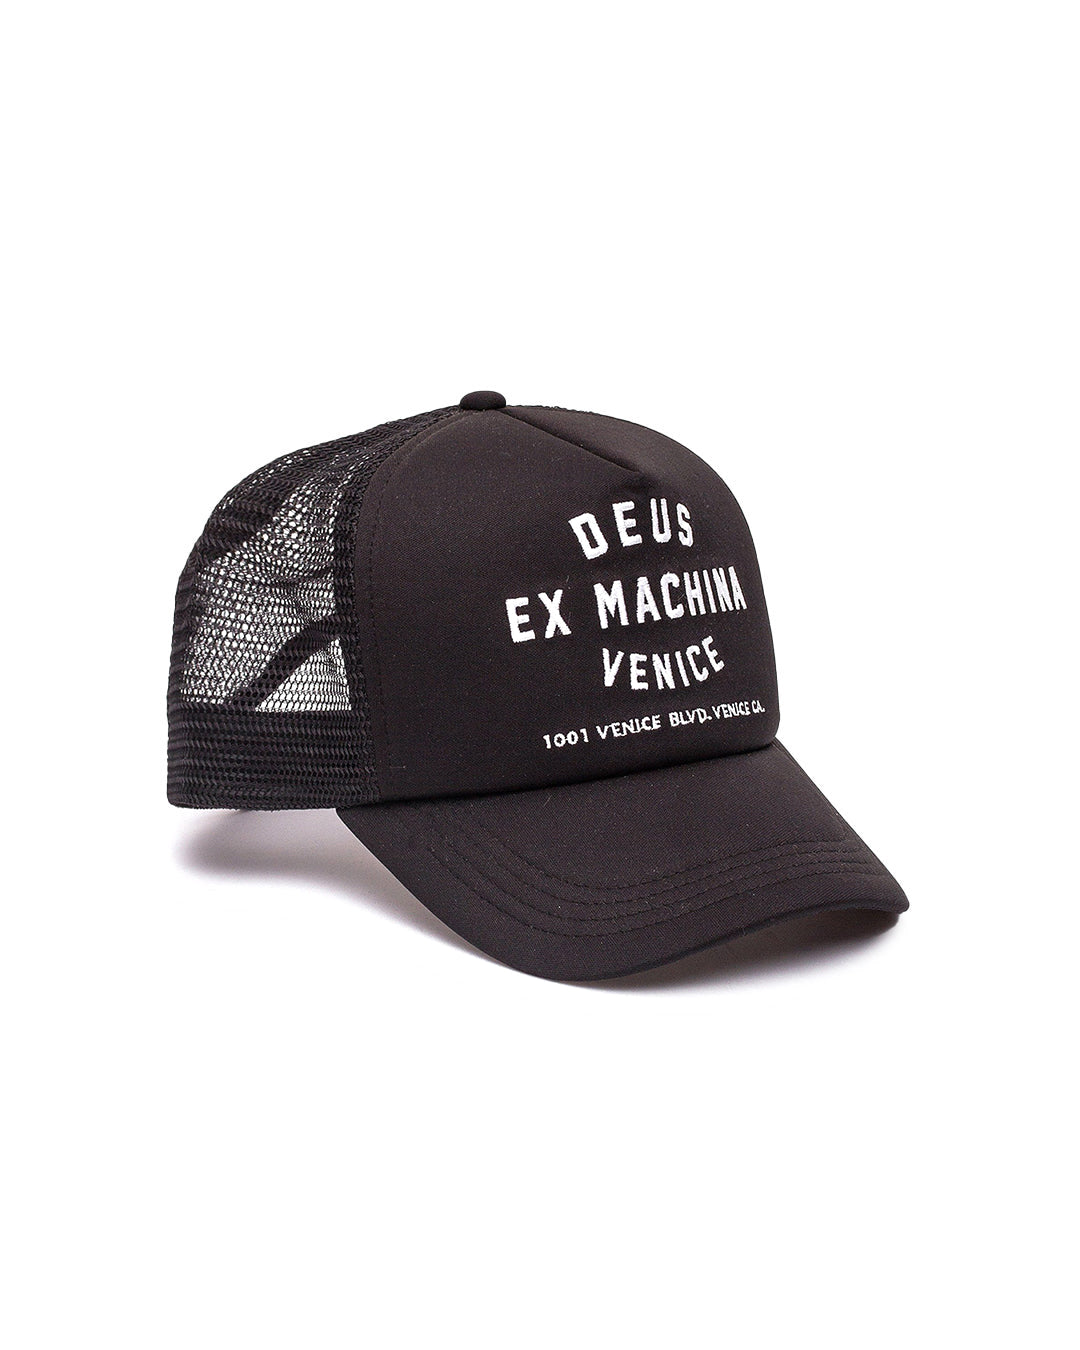 Black classic trucker cap with front address embroidery in 60% polyester interlock 40% nylon mesh fabrication with plastic snap adjuster|Flatlay